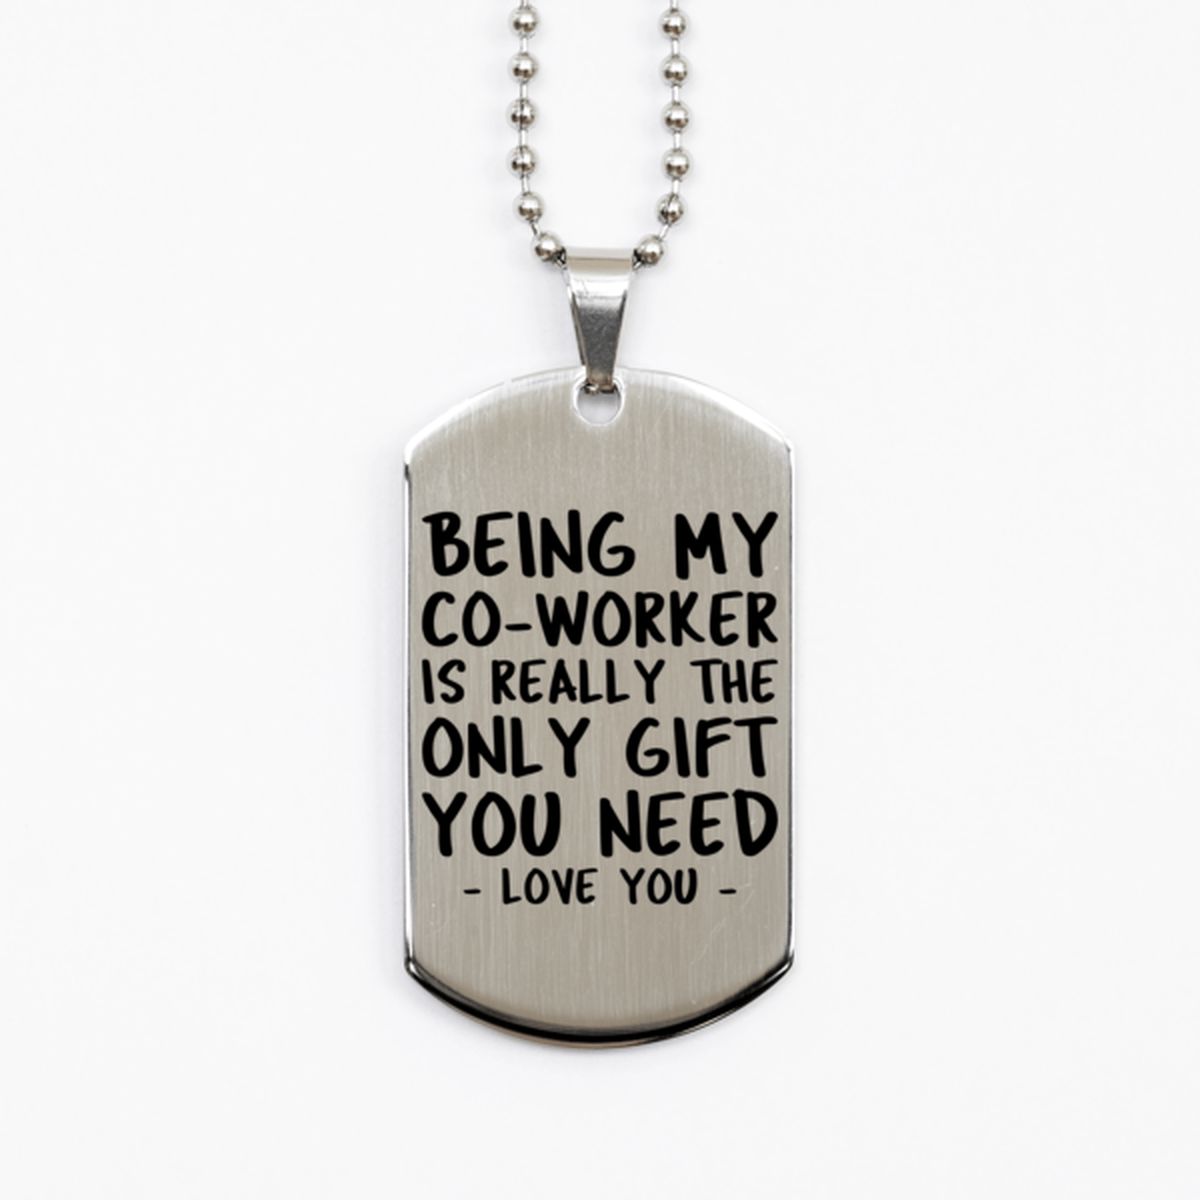 Funny Co-worker Silver Dog Tag Necklace, Being My Co-worker Is Really the Only Gift You Need, Best Birthday Gifts for Co-worker